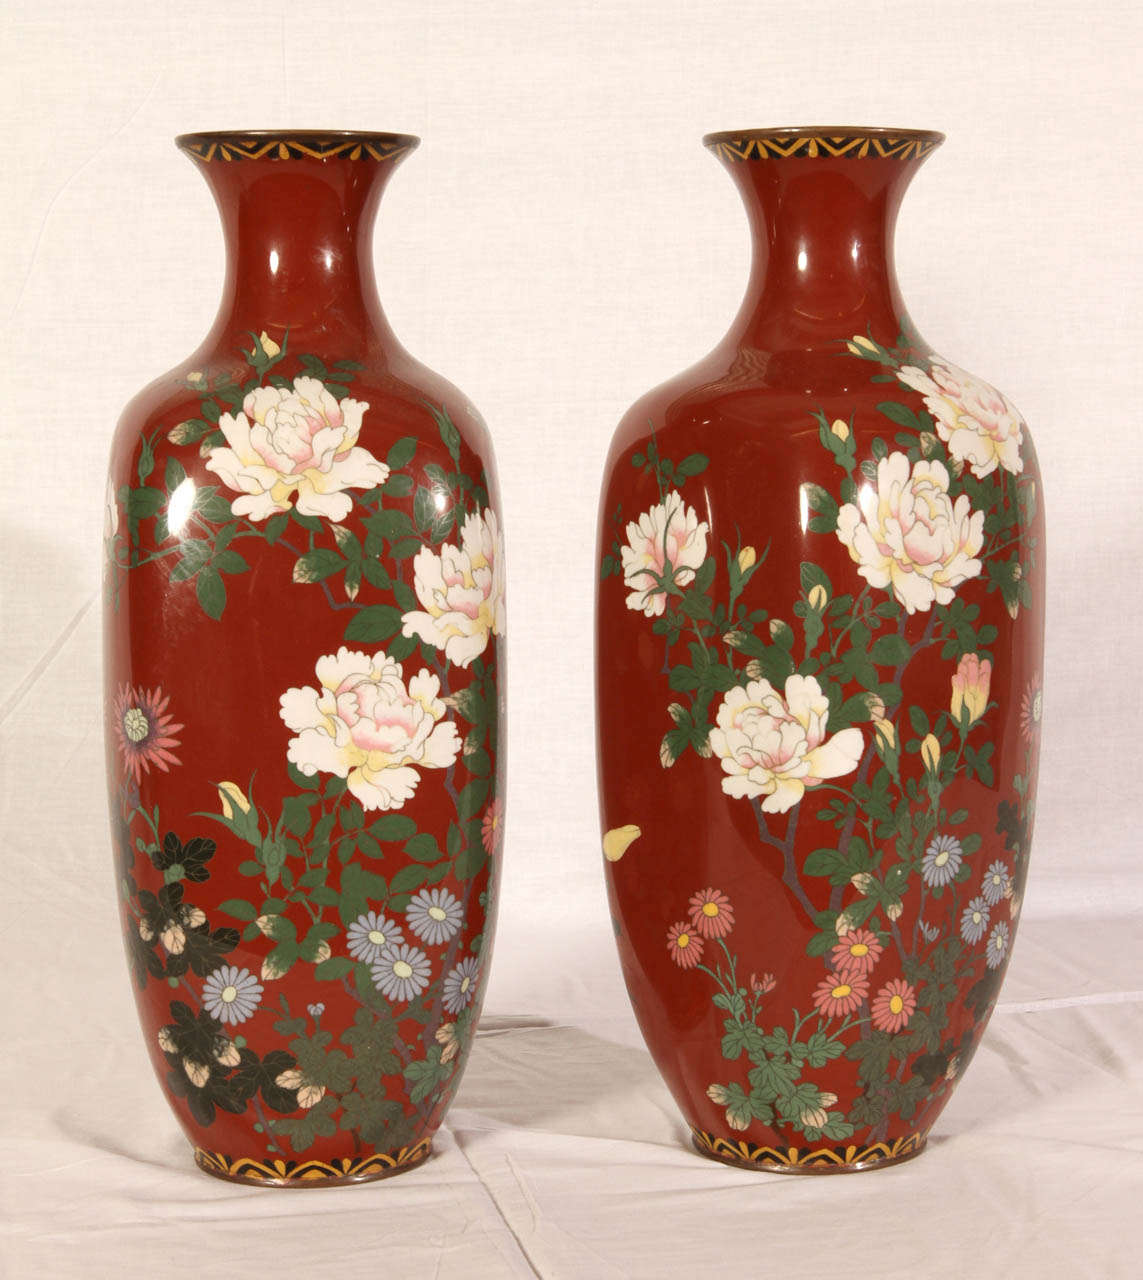 Pair of early 20th Century Japanese vases. Polychrome porcelain and cloisonne enamel with a flower decor. Very good condition. Normal wear consistent with age and use.